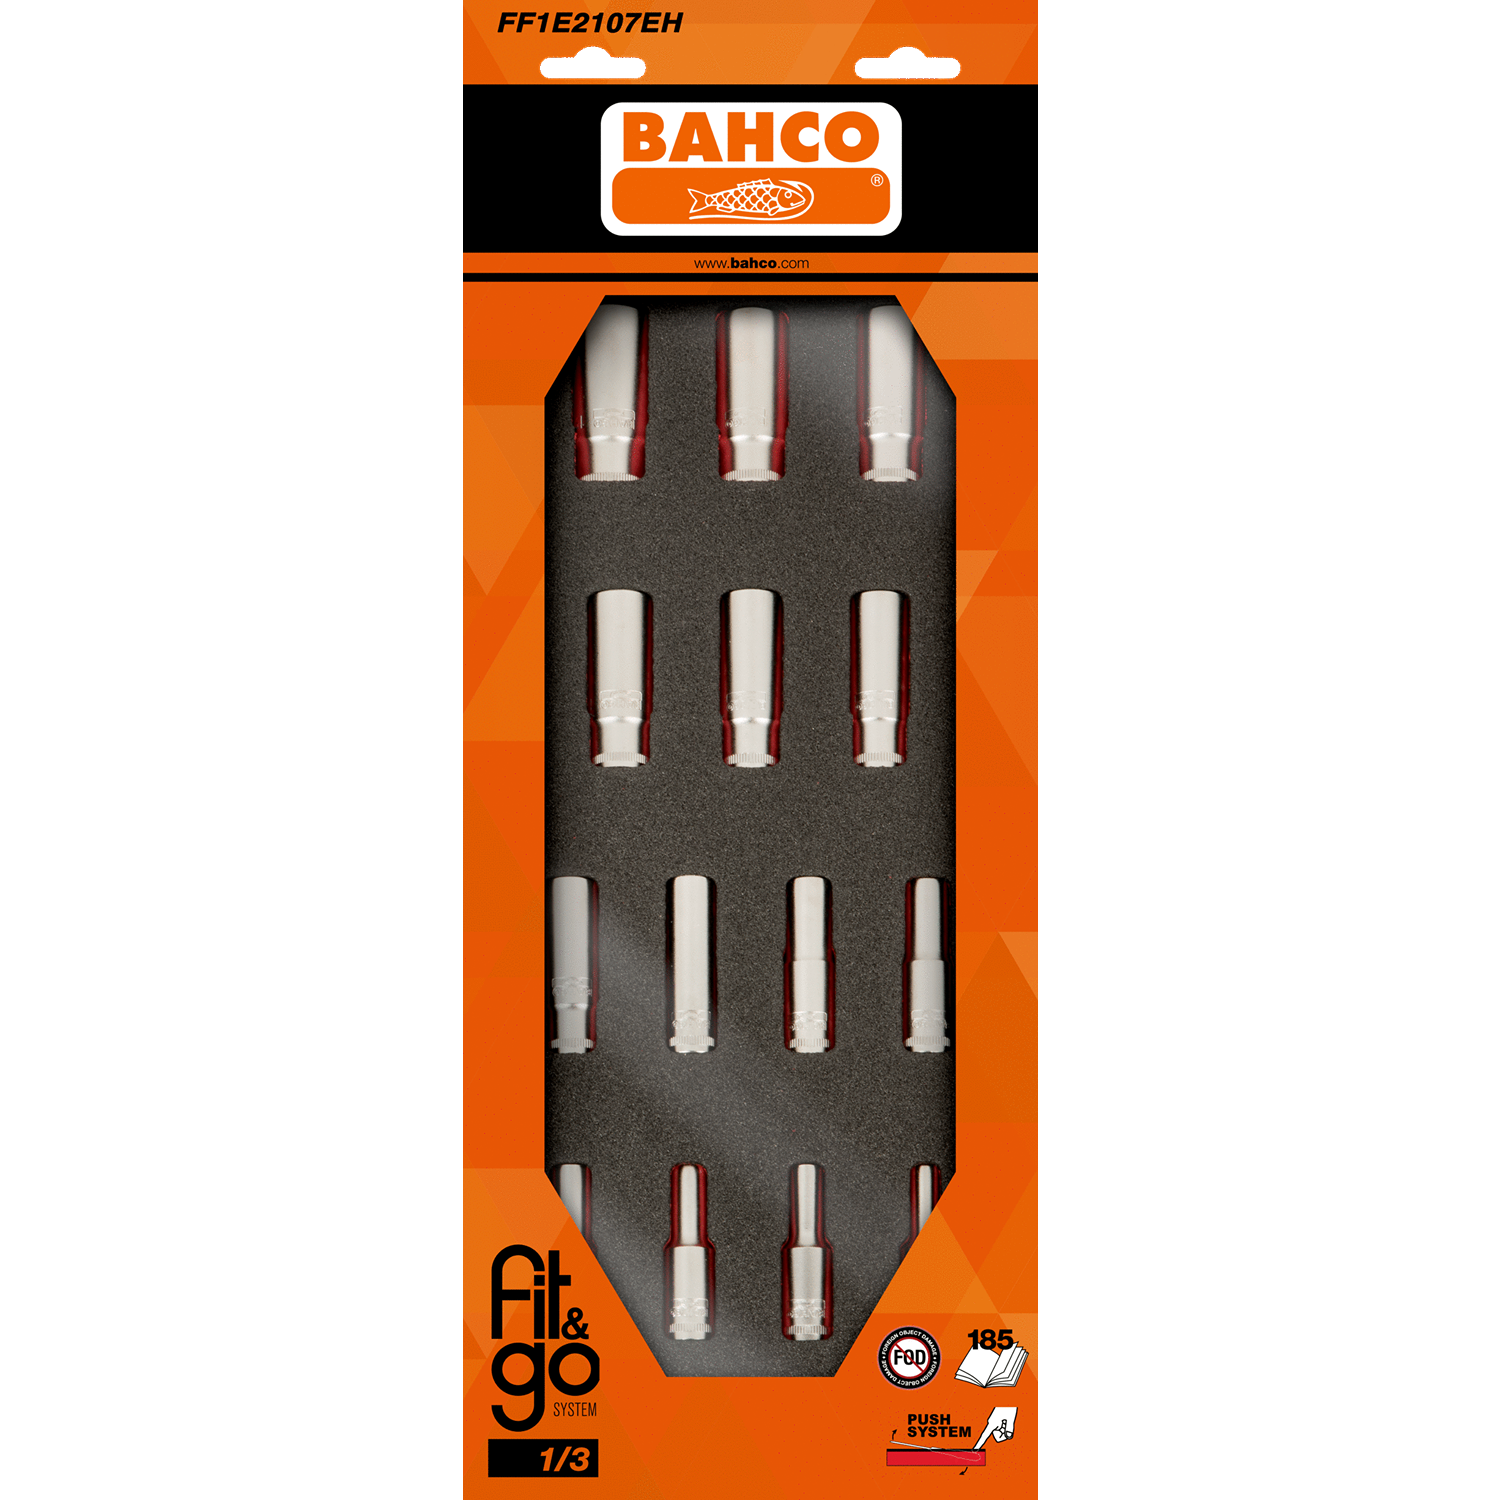 BAHCO FF1E2215EH Fit&Go 1/3 Foam Inlay 1/2” Deep Socket Set - Premium SOCKET SET from BAHCO - Shop now at Yew Aik.